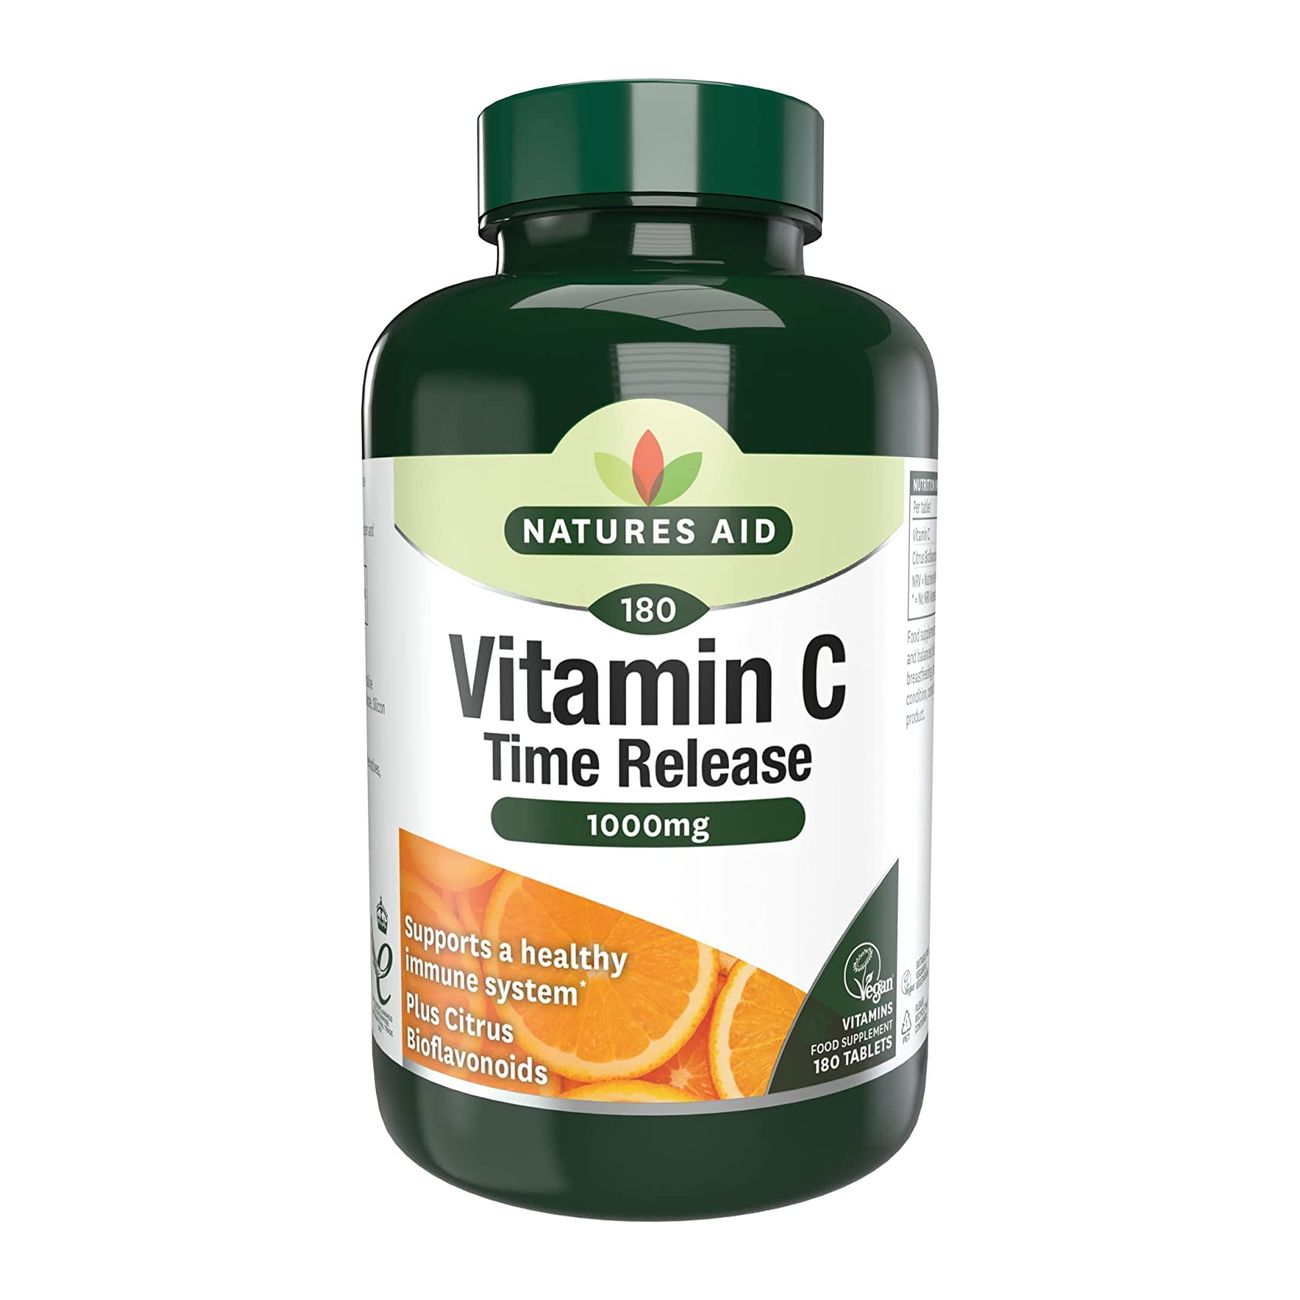 Vitamin C Time Release 1000mg 180 Tablets